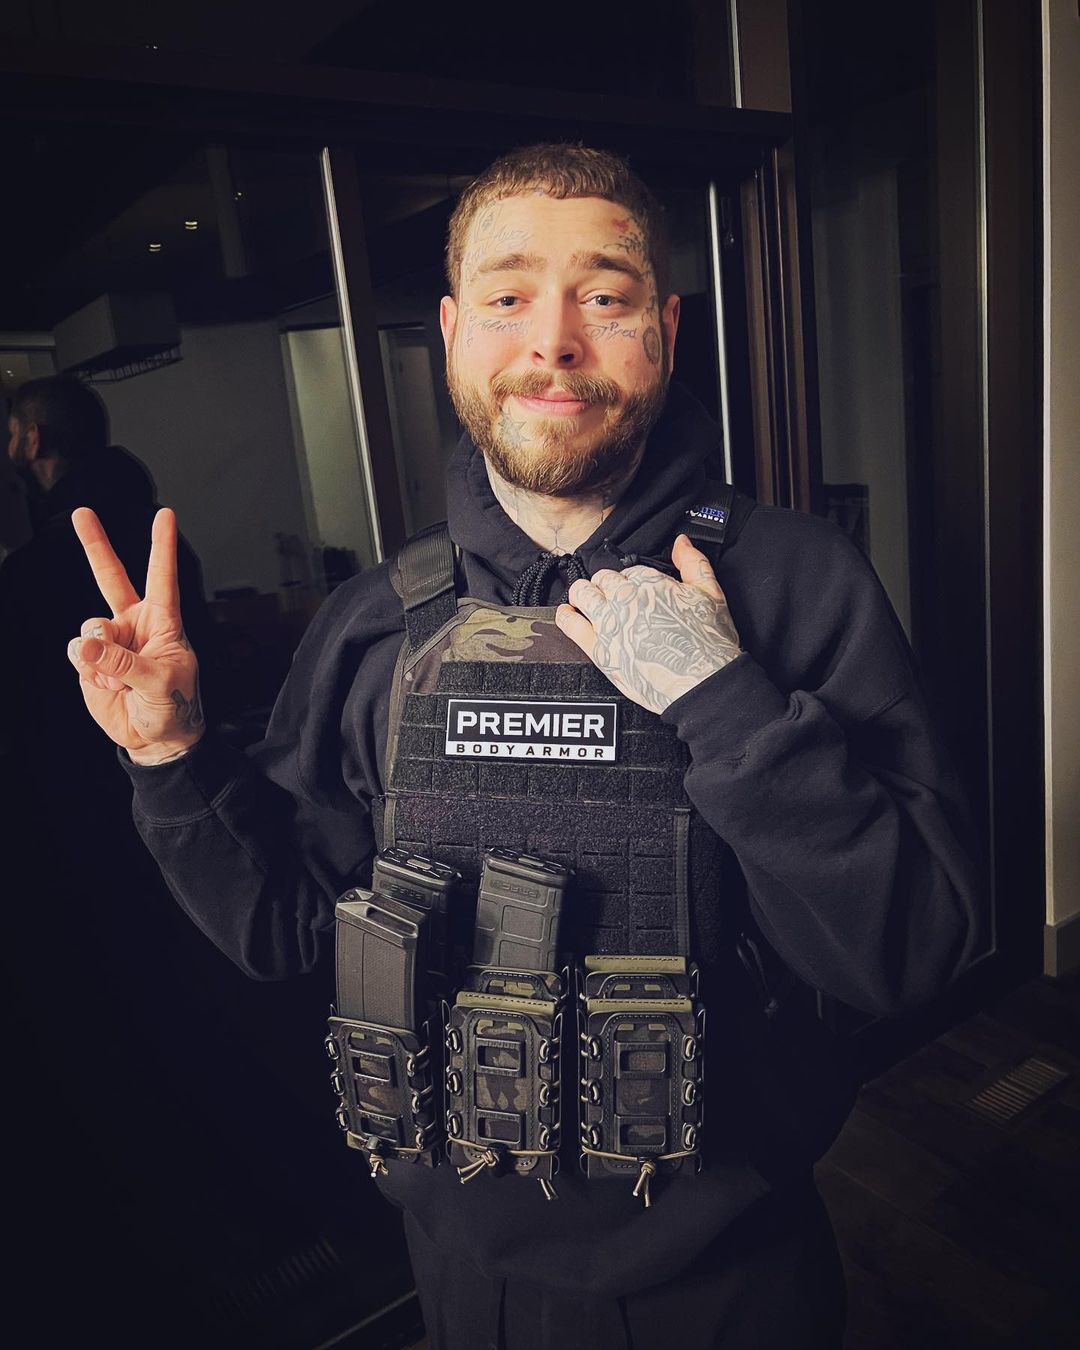 Post Malone at SHOT wearing Premier's Elite Executive Vest with "Eclipsys cooling technology". 